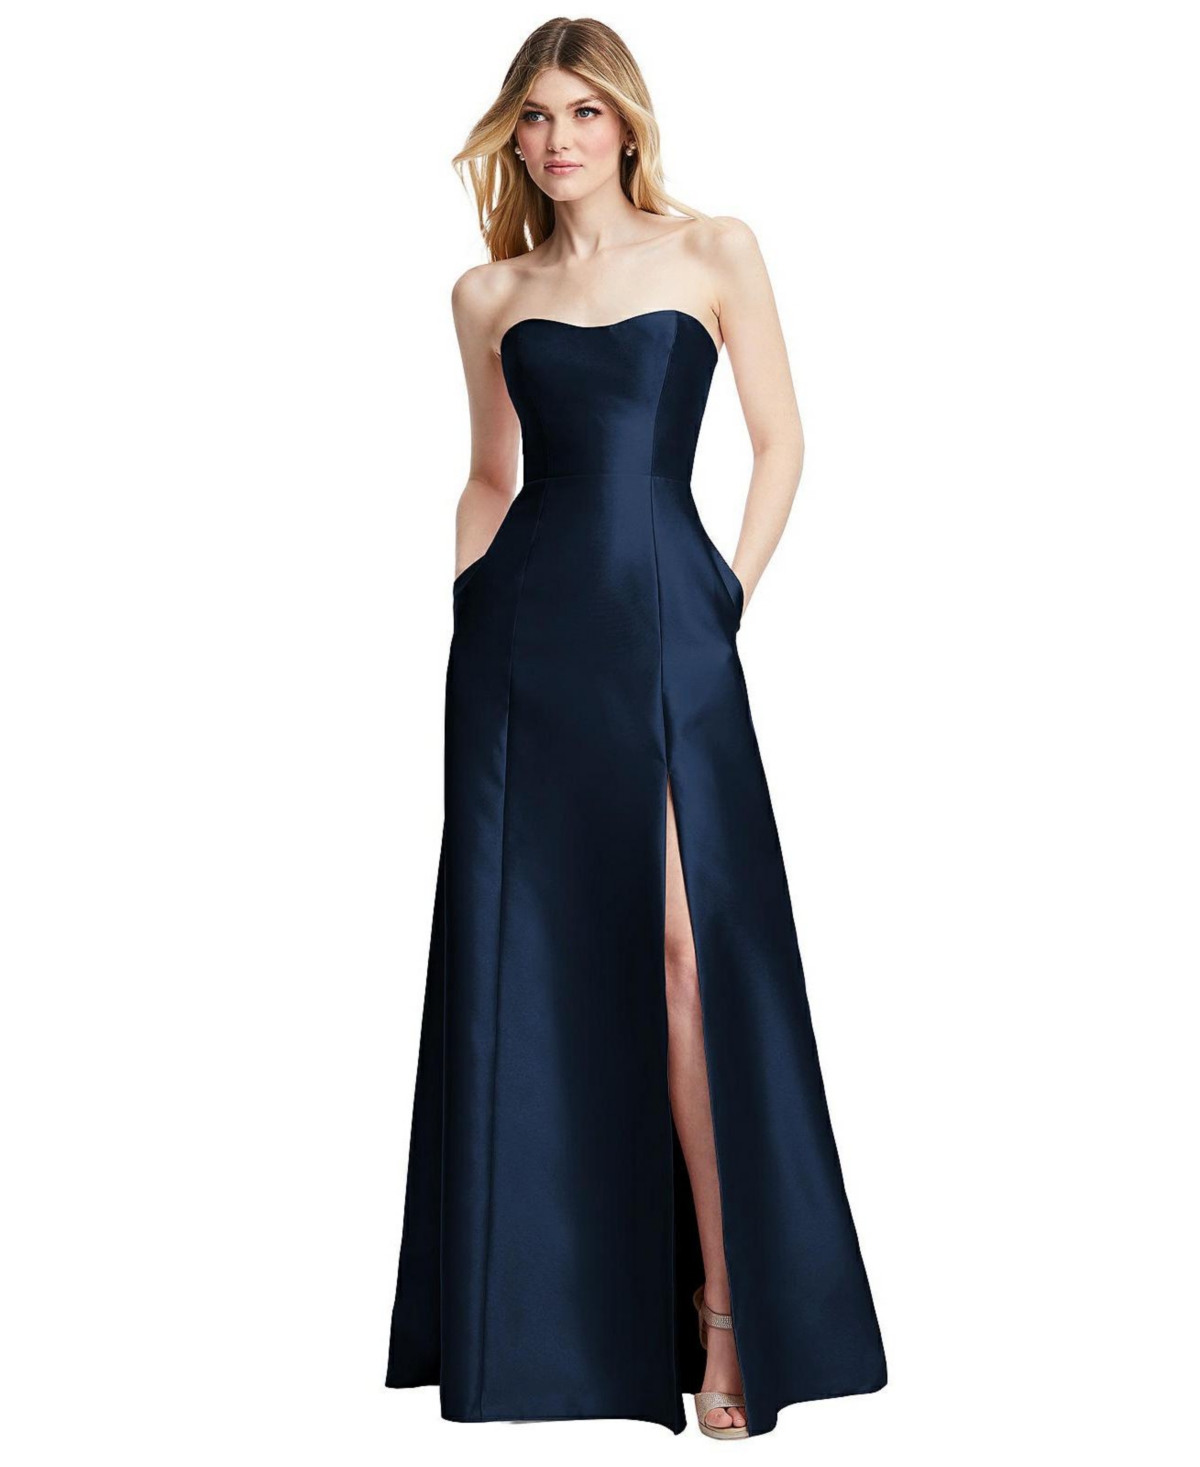 ALFRED SUNG WOMENS STRAPLESS A-LINE SATIN GOWN WITH MODERN BOW DETAIL